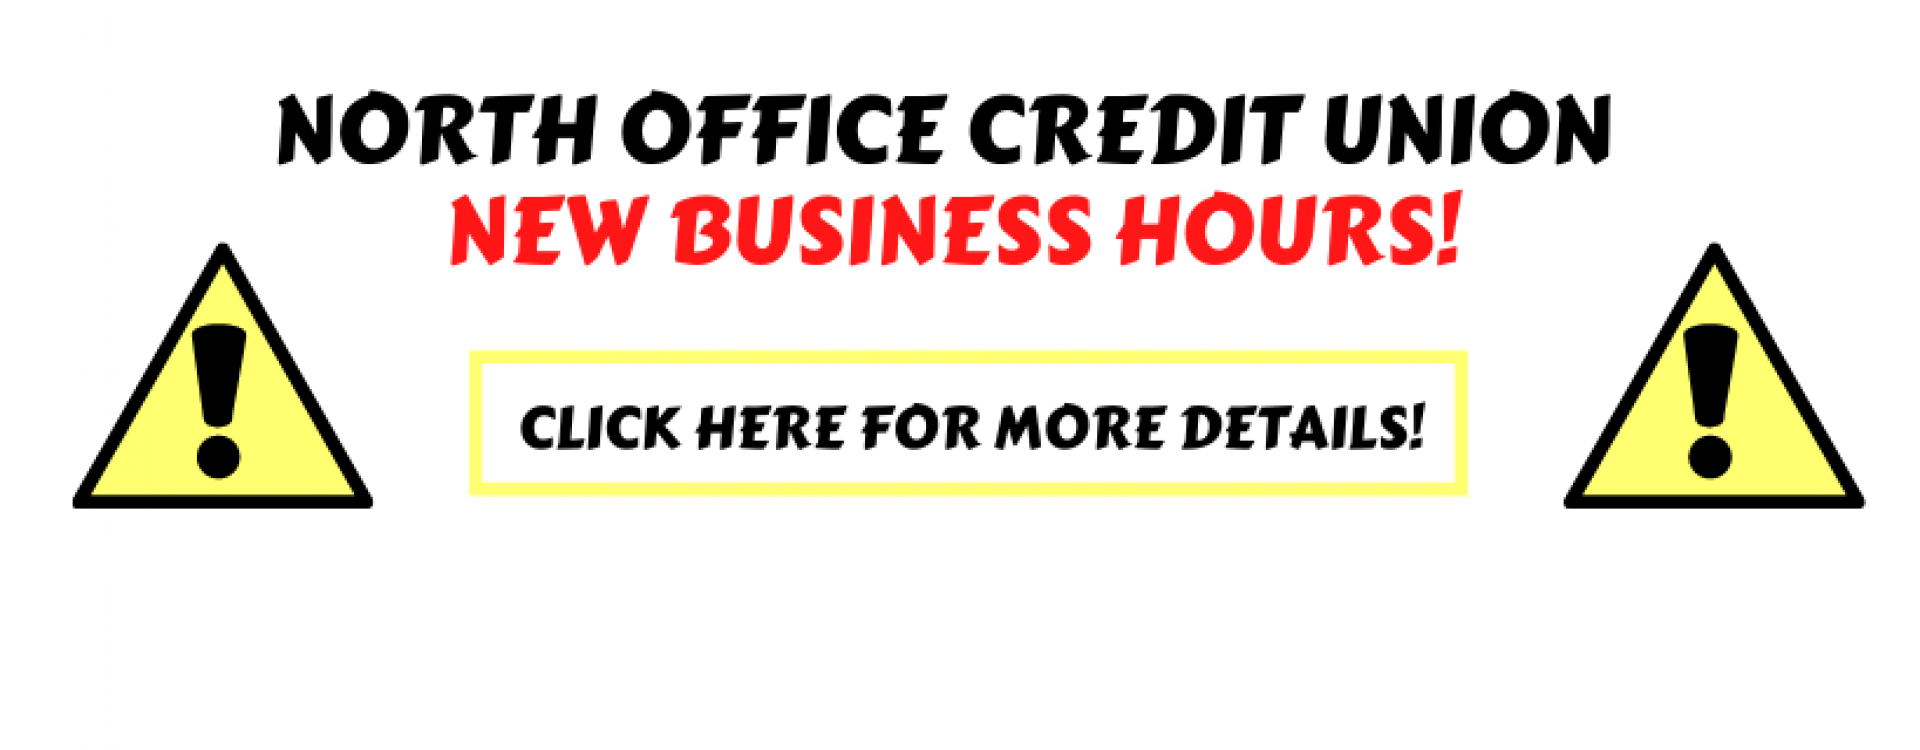 North Office Credit Union - New Business Hours! Click here for more details!